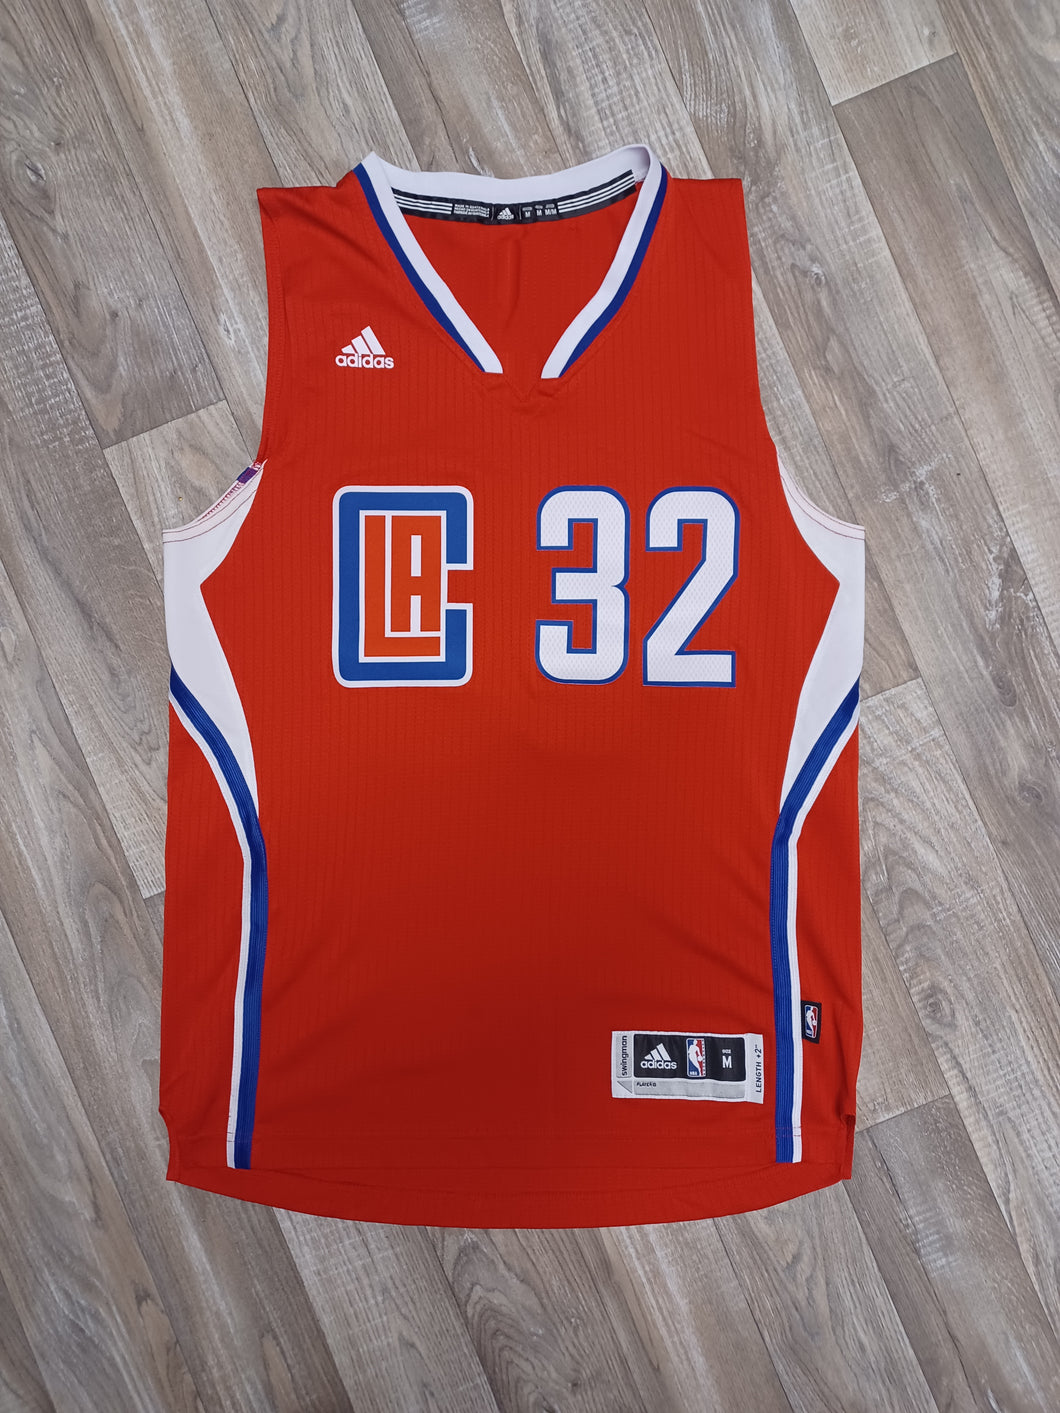 Blake Griffin Los Angeles Clippers Jersey Size Medium